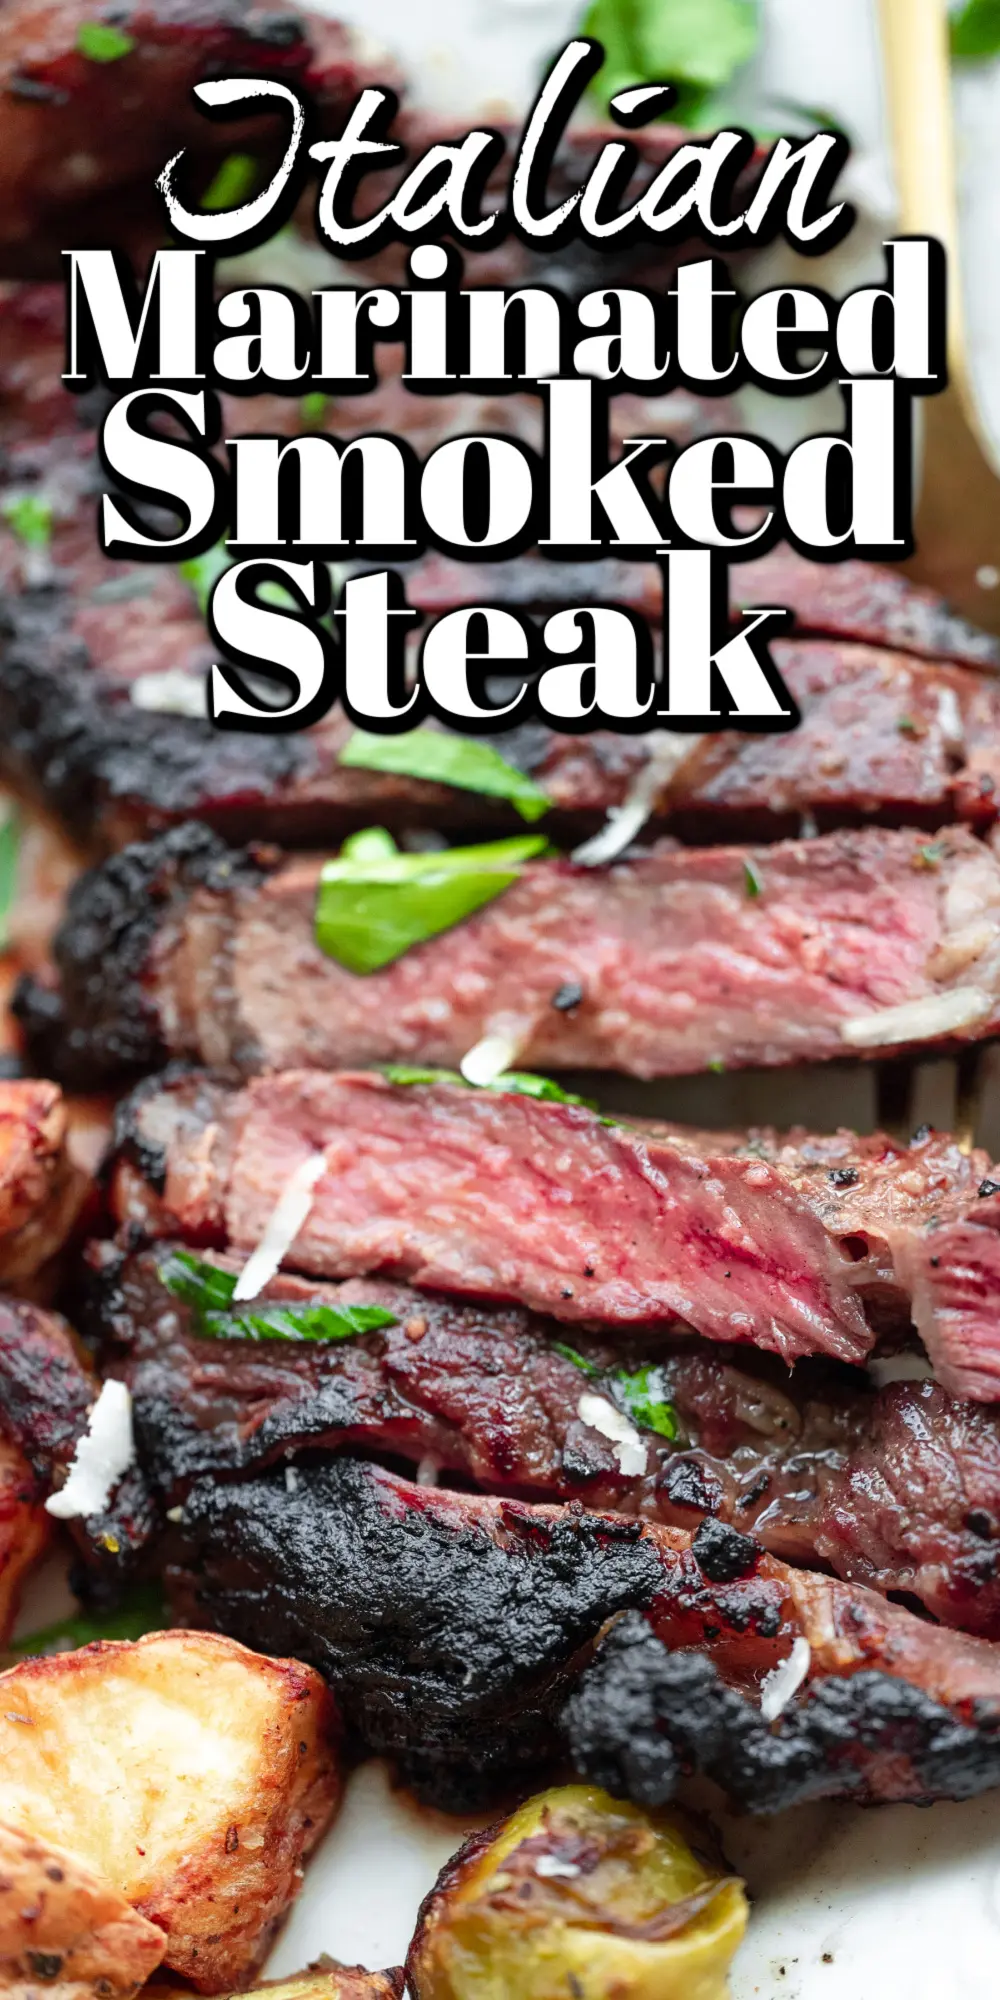 smoked steak marinade - What are 3 common ingredients in a marinade